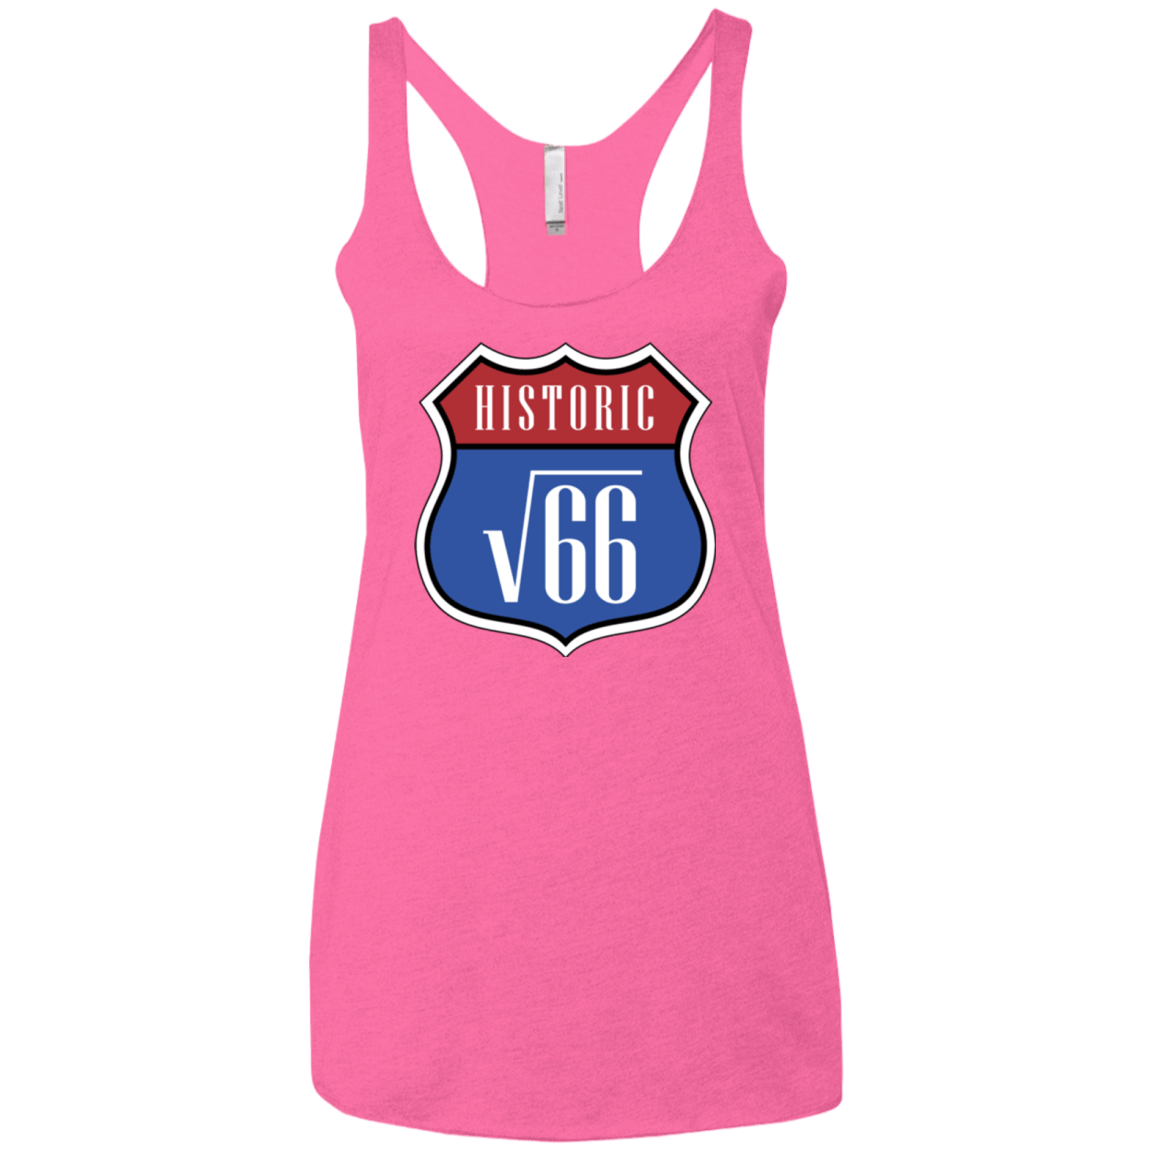 T-Shirts Vintage Pink / X-Small Route v66 Women's Triblend Racerback Tank